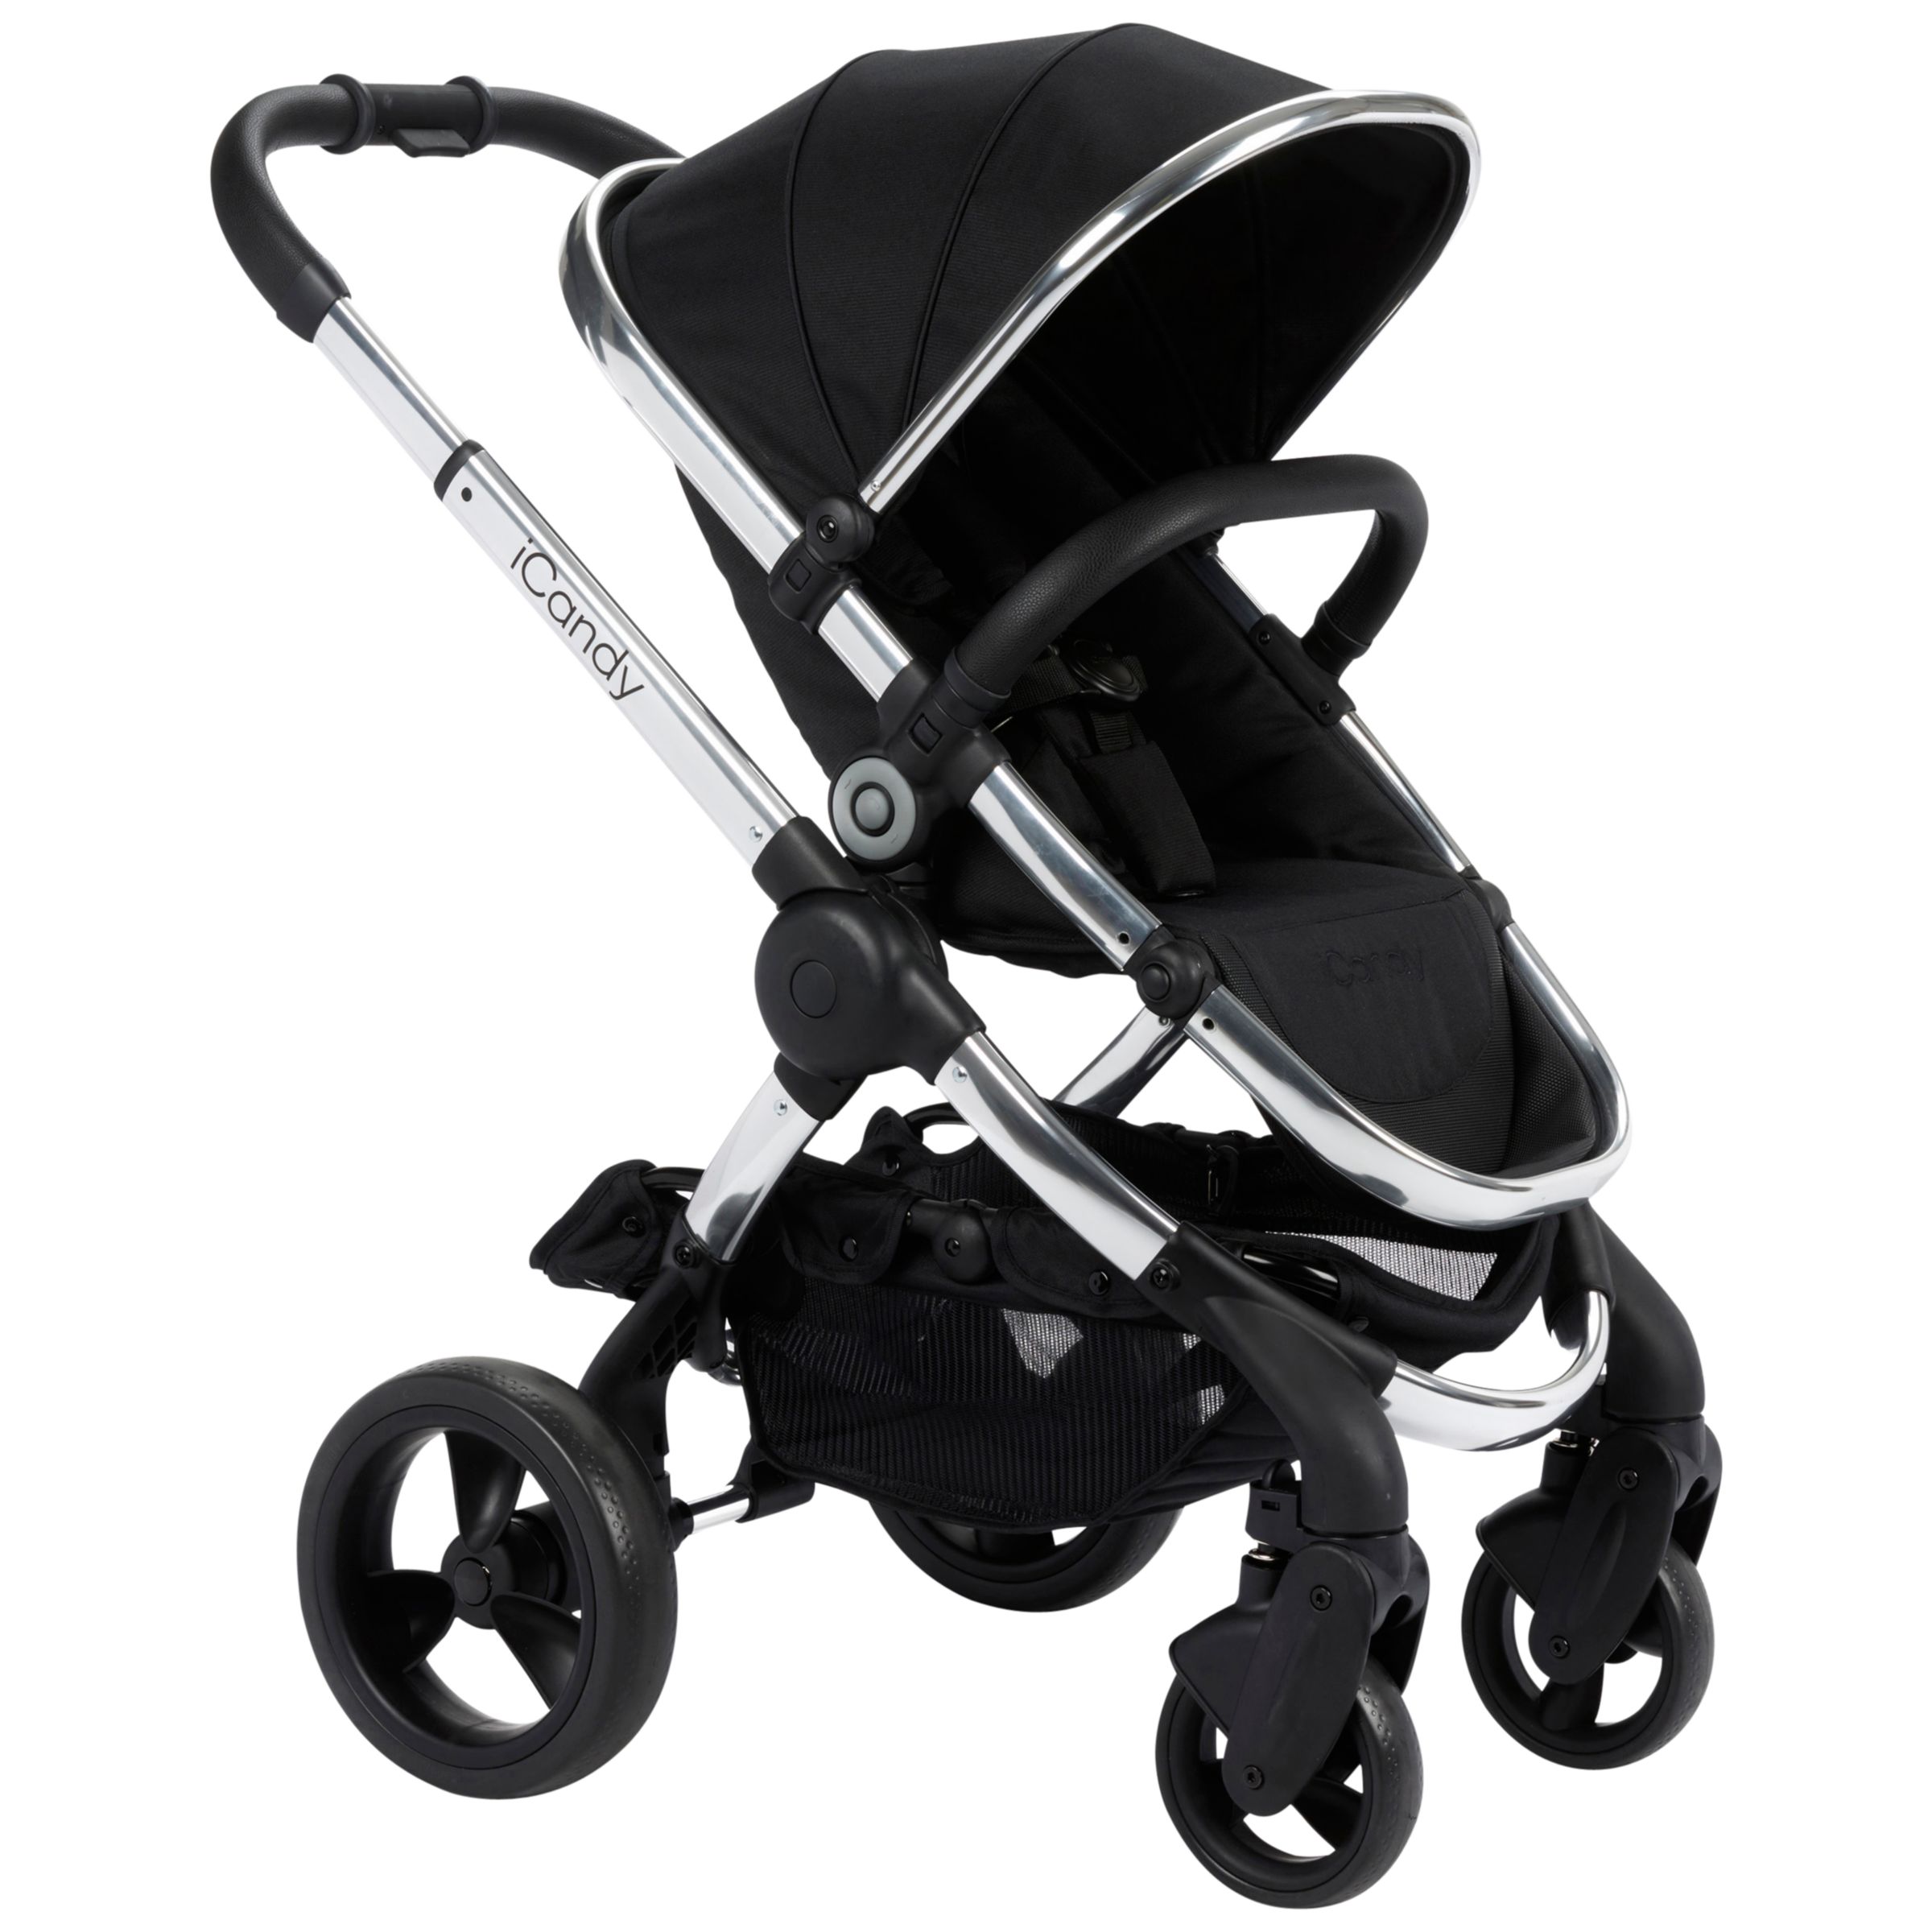 iCANDY PEACH PUSHCHAIRS & ACCESSORIES 2016 - 6 APRIL 2018